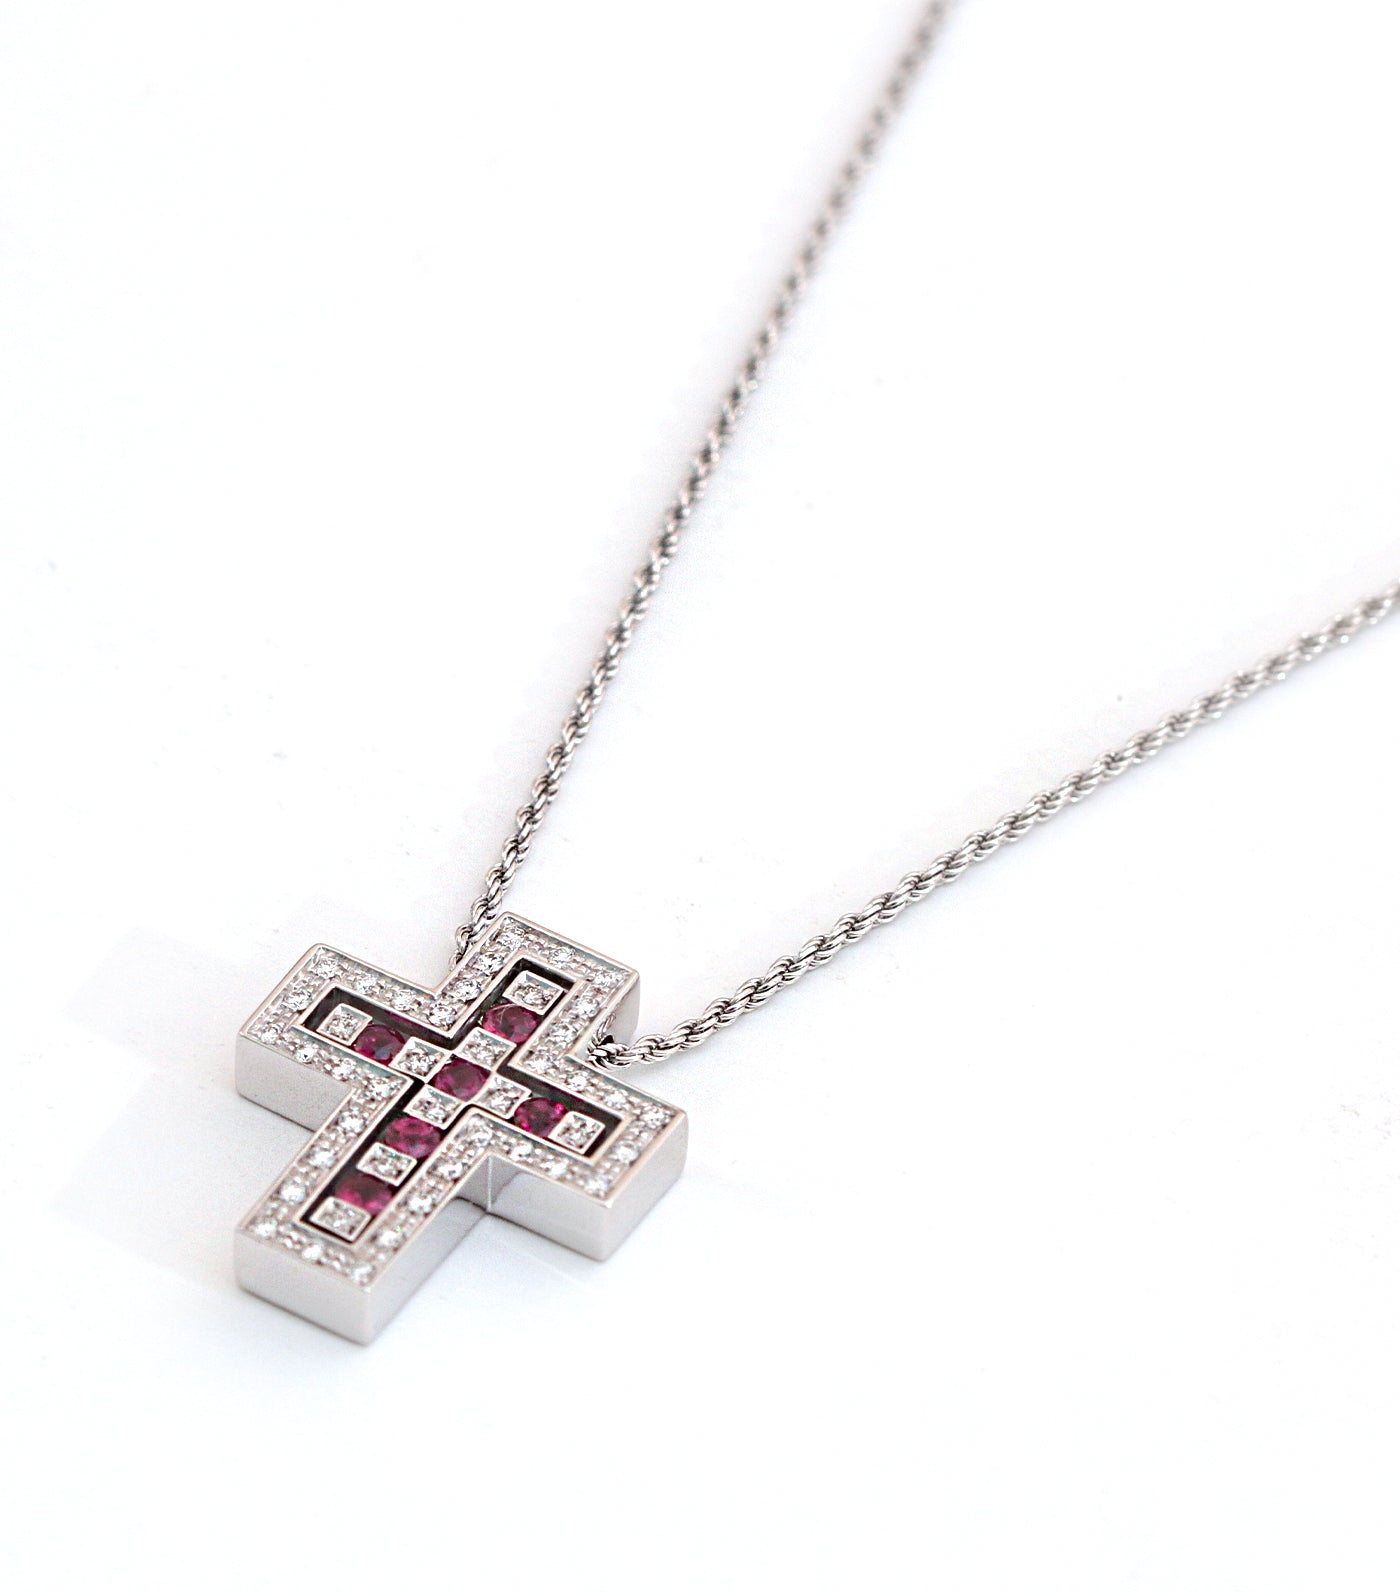 Belle Belle Epoque 18K White Gold, Diamonds, and Rubies Cross Necklace